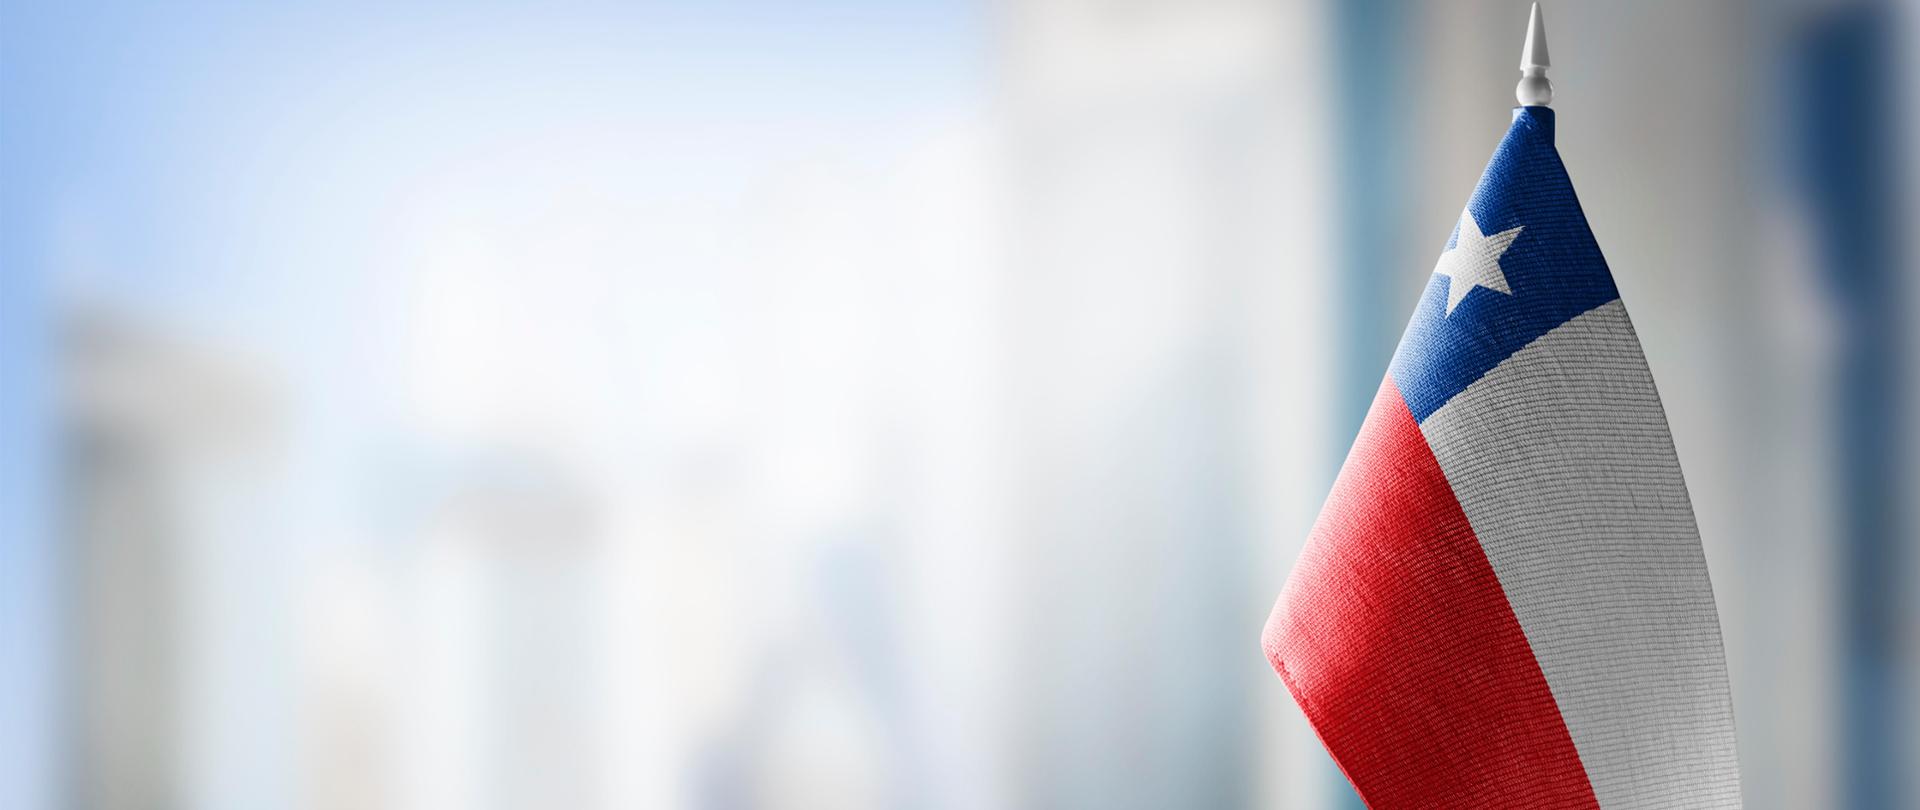 A small flag of Chile on the background of an urban abstract blurred background.